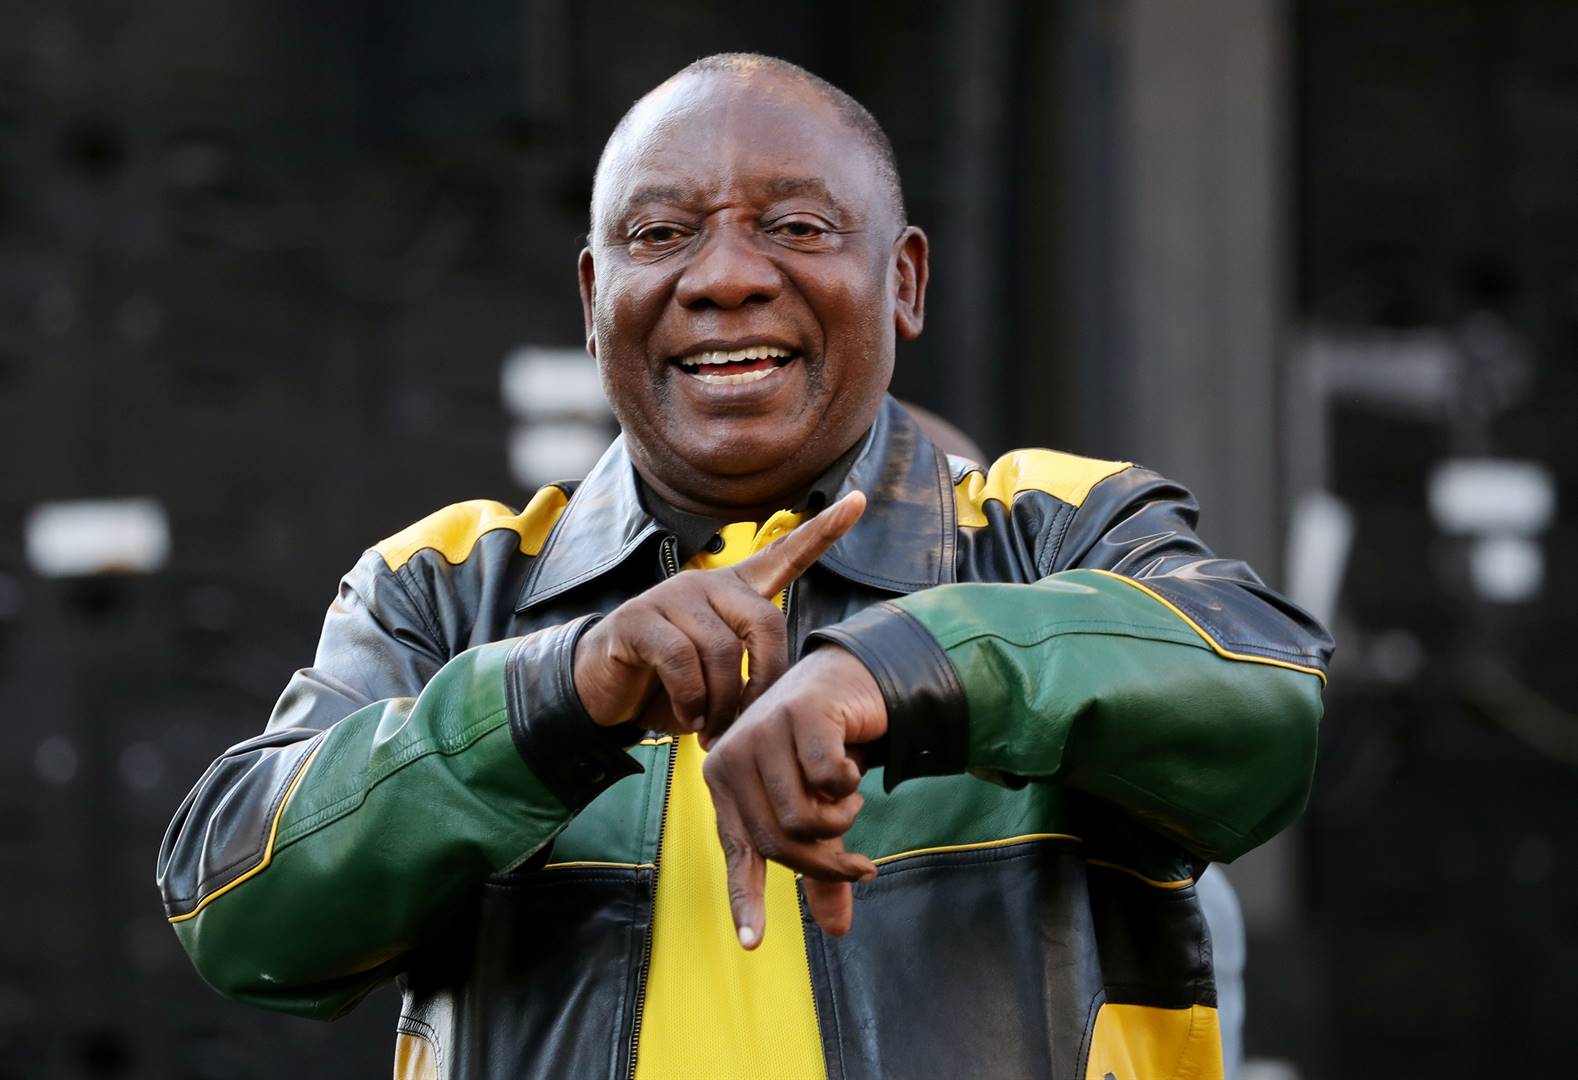 President Cyril Ramaphosa addresses ANC supporters at an election victory rally in Johannesburg on Sunday (May 12 2019). Picture: Mike Hutchings/Reuters